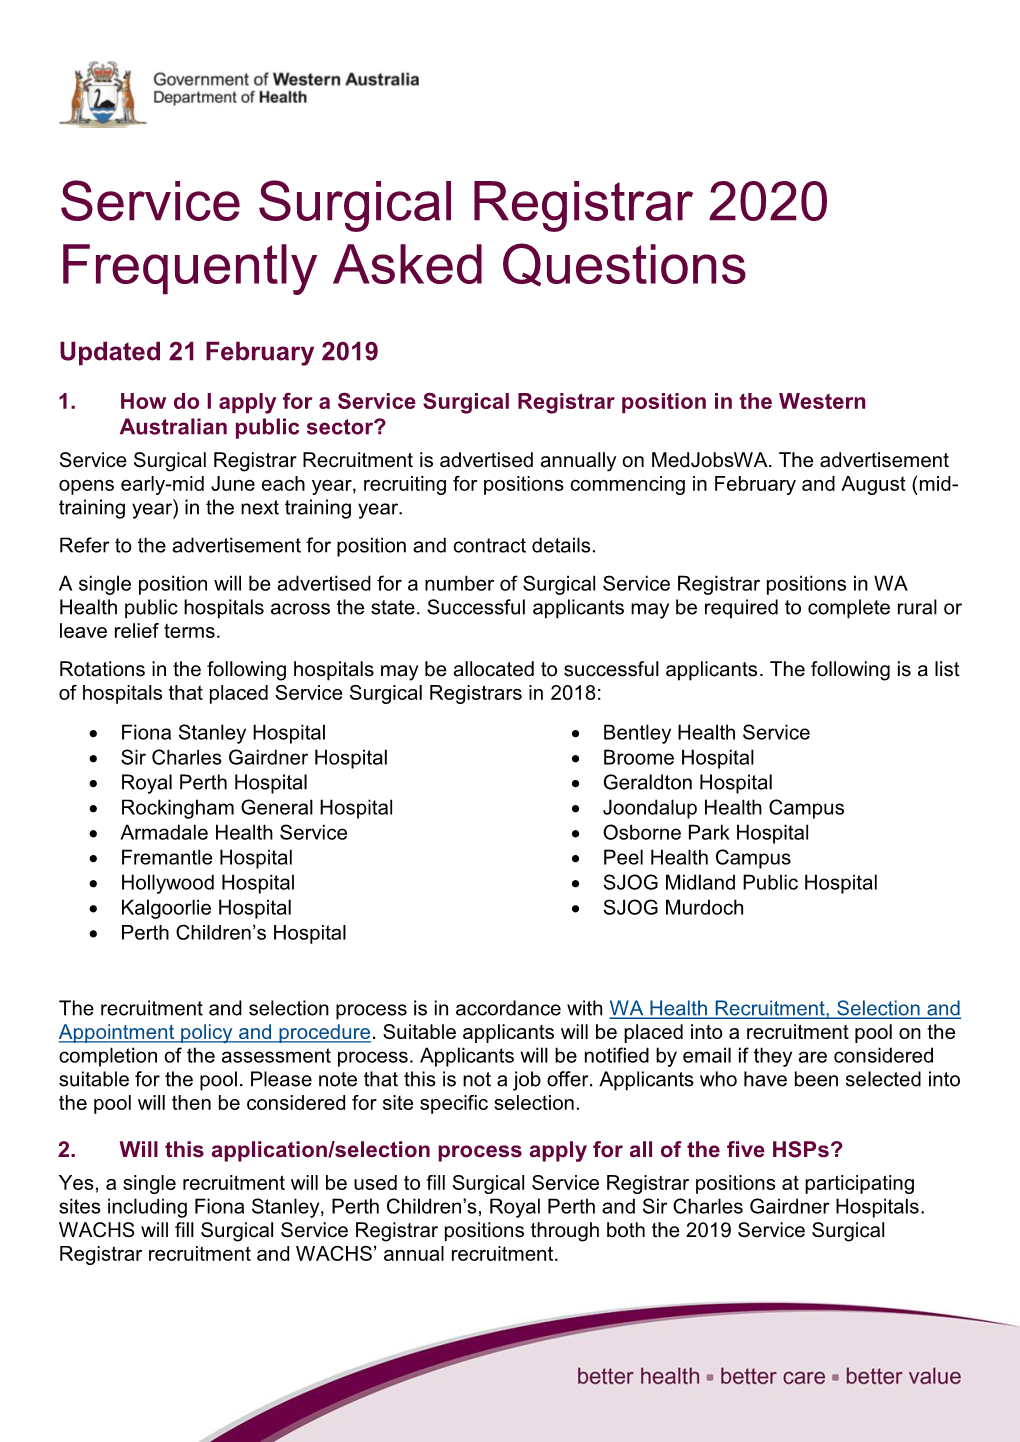 Service Surgical Registrar 2020 Frequently Asked Questions